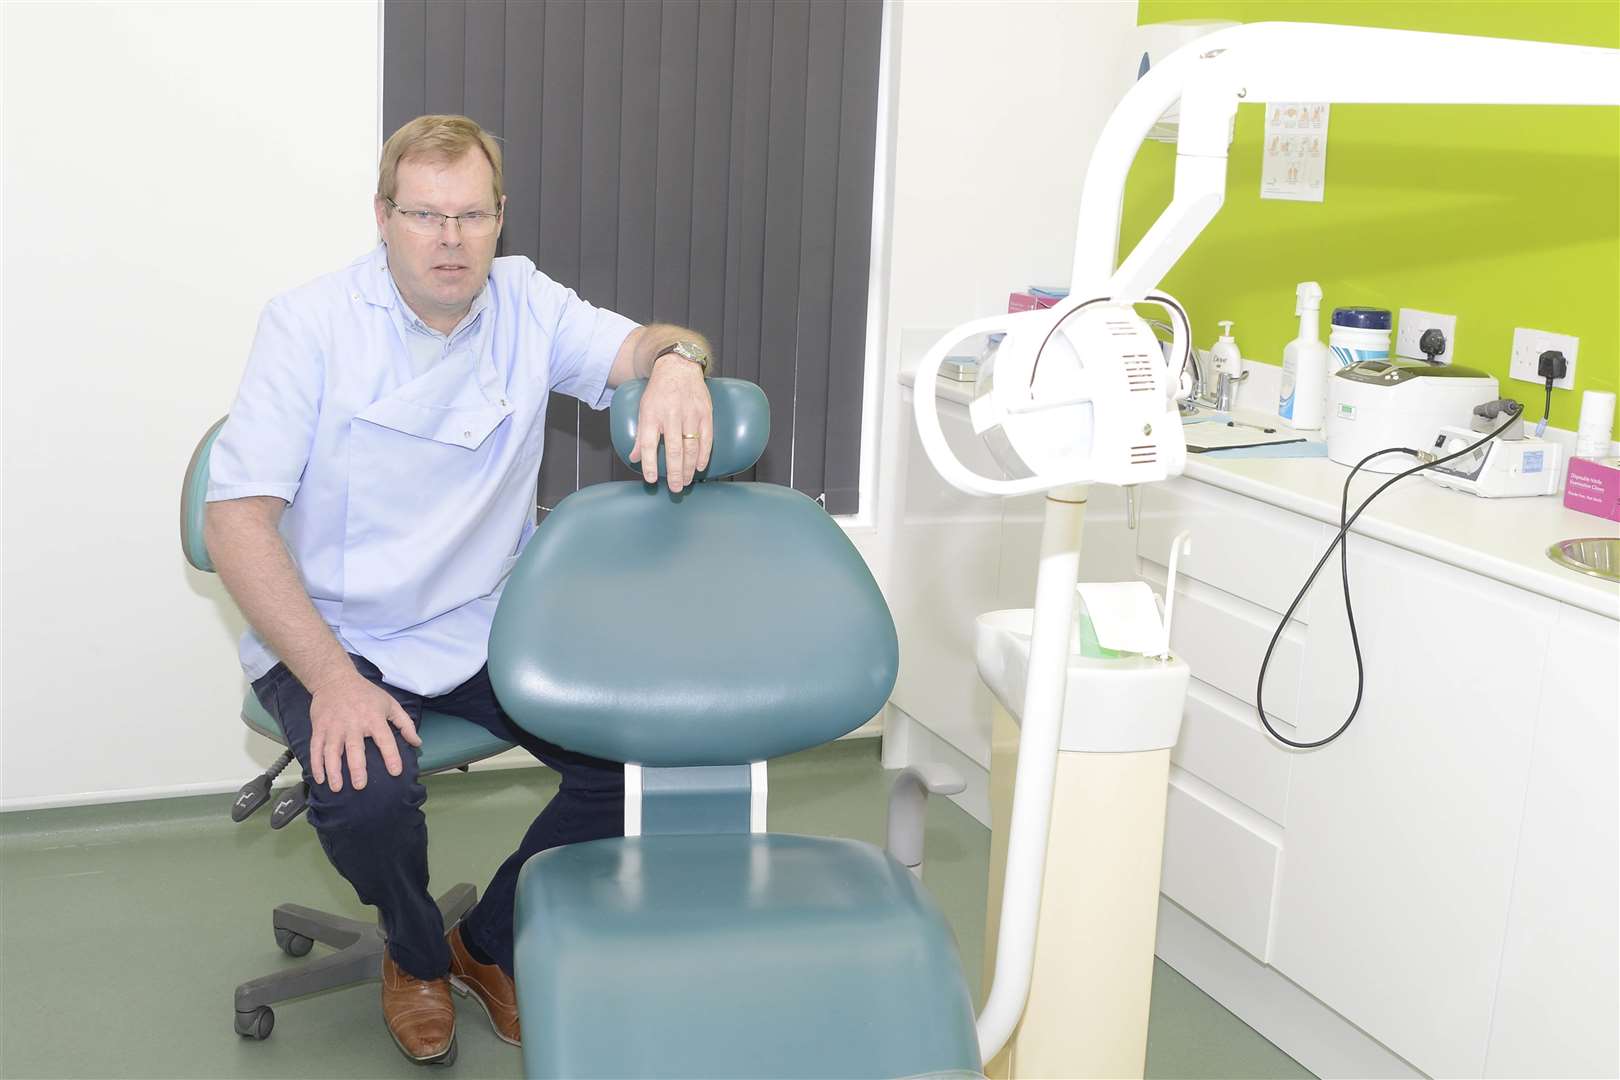 Peter Price who heads up Clinical Denture Centre